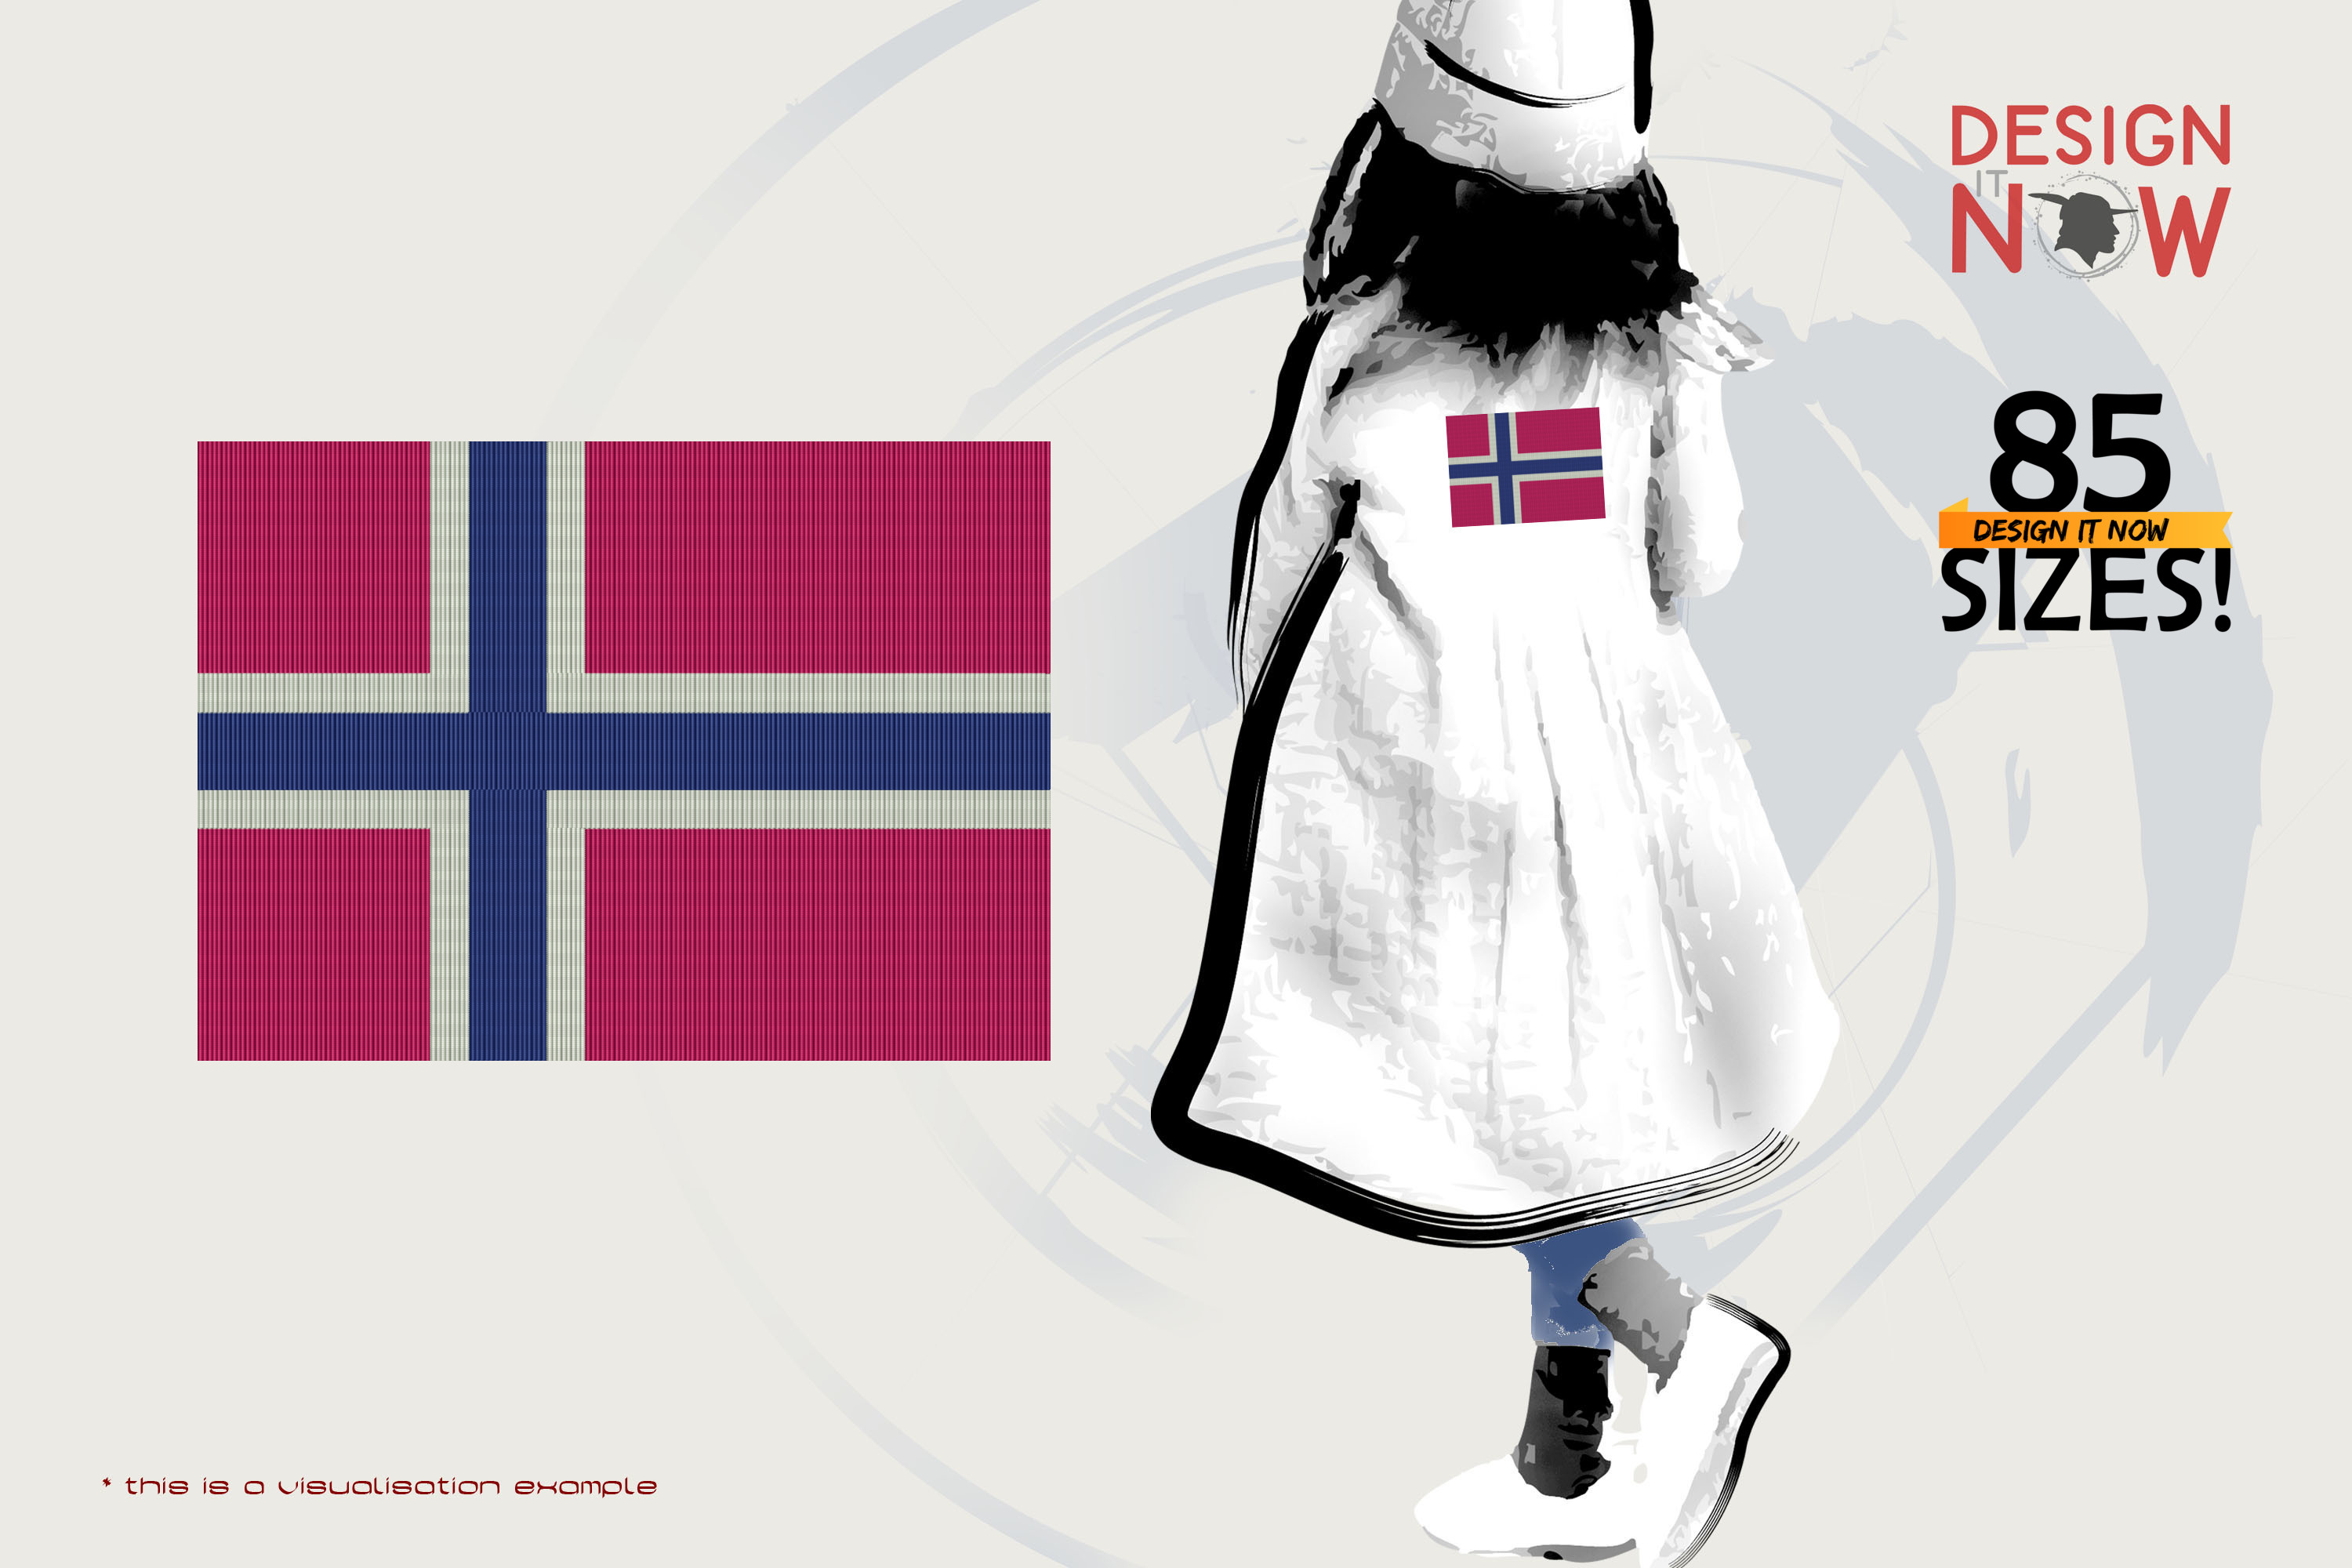 Norway-Norge-The Kingdom of Norway